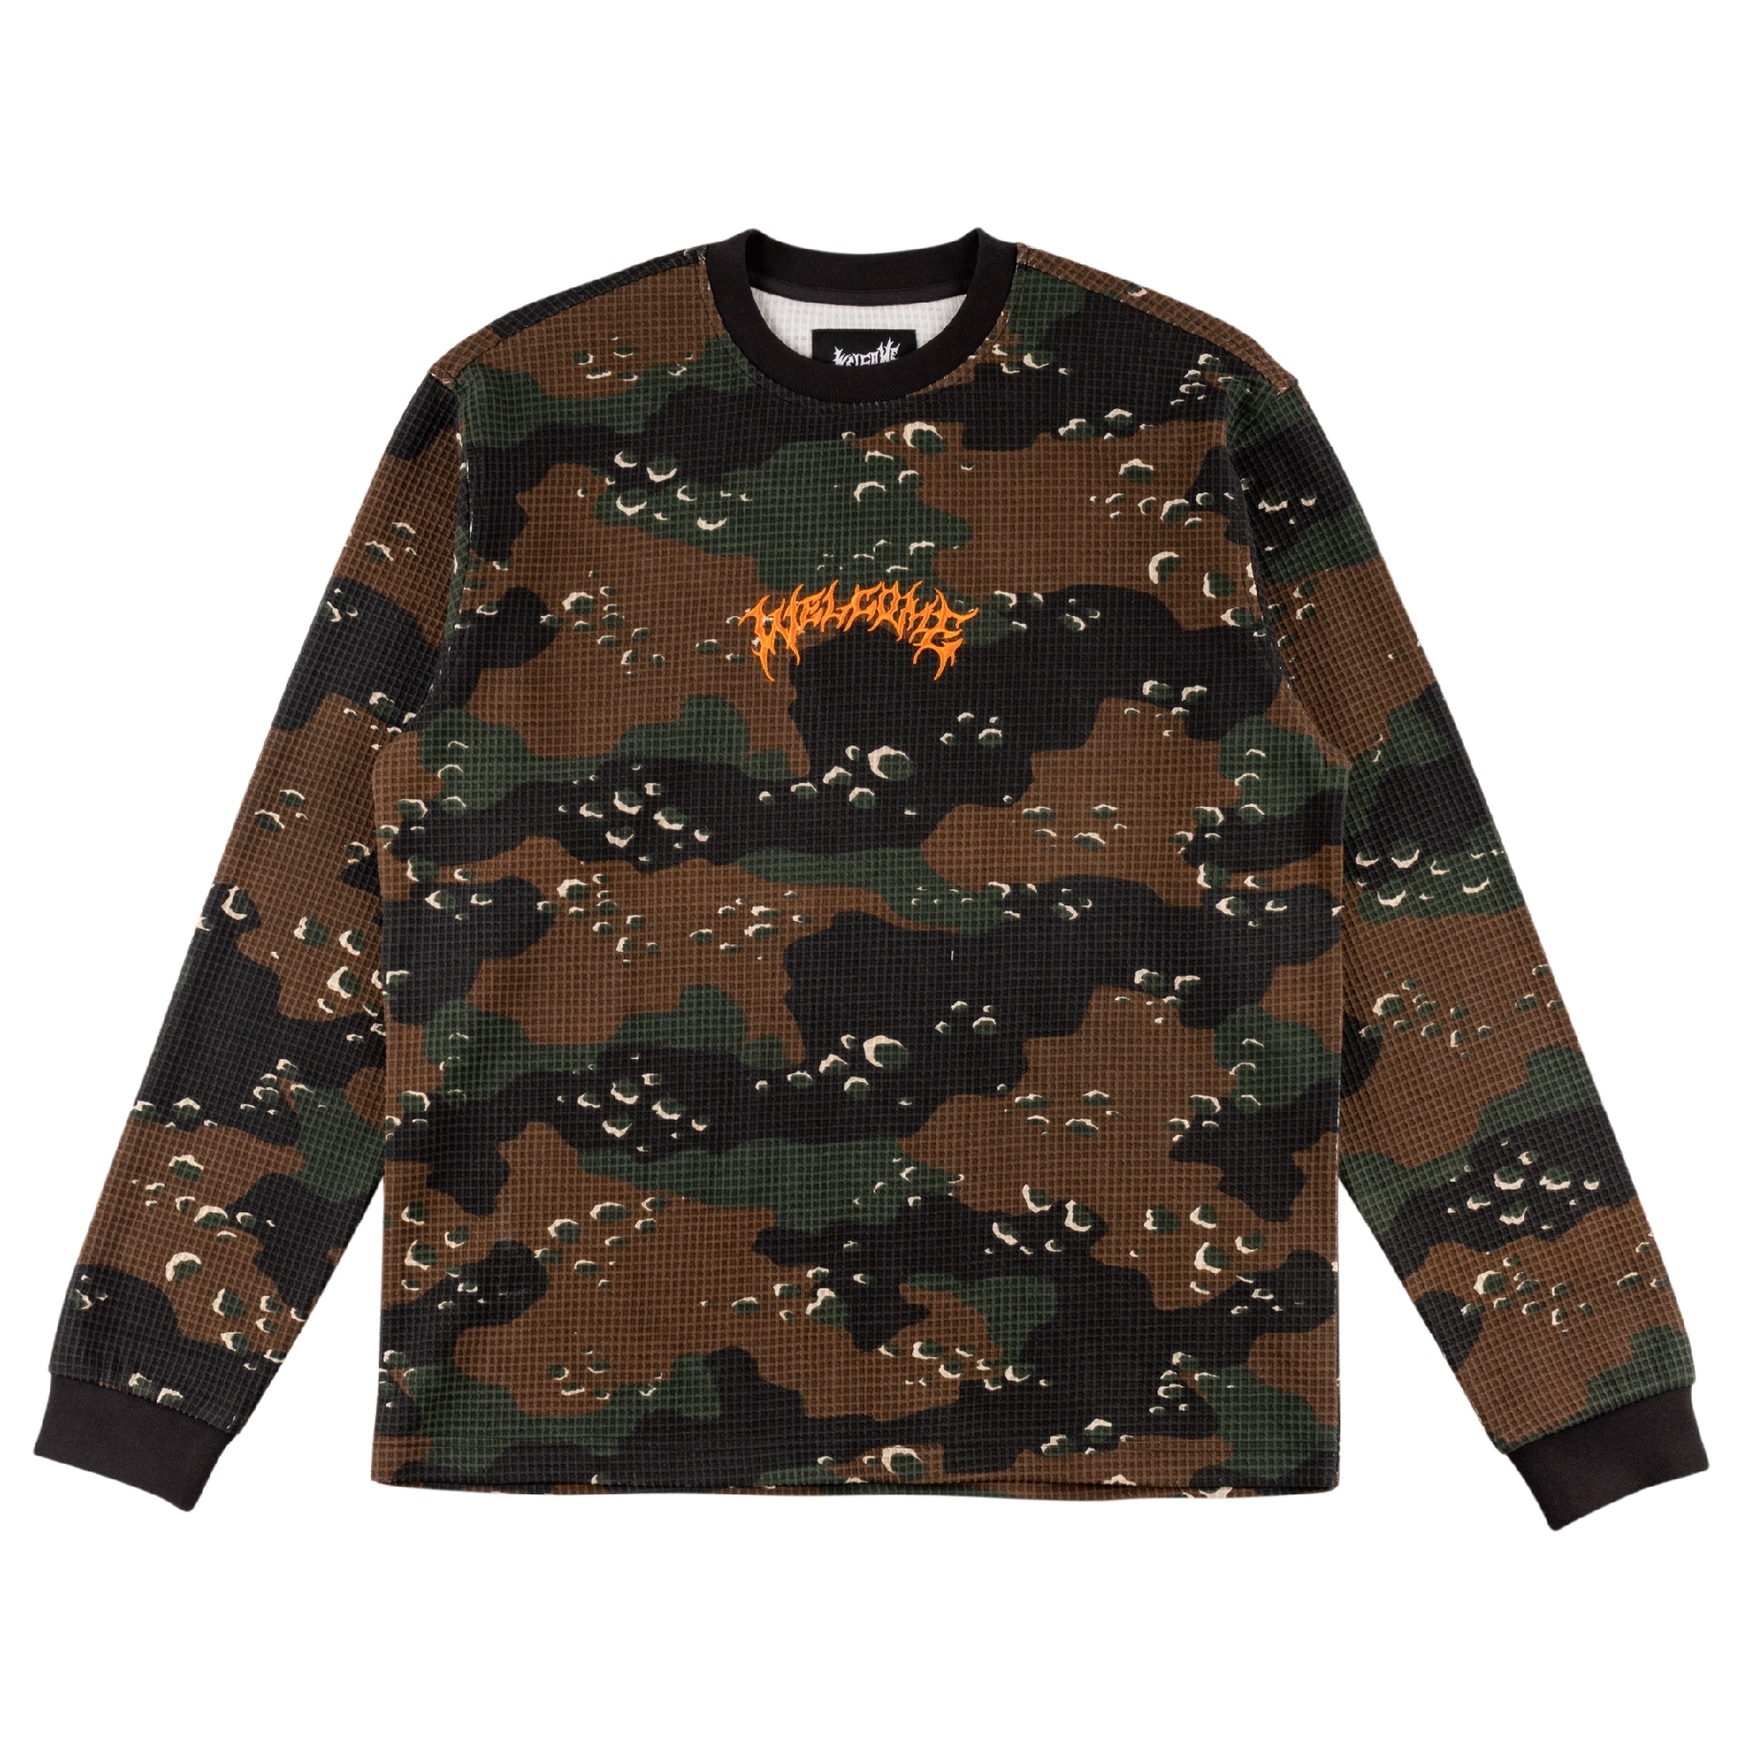 Covert L/S Camo Thermal (Timber)